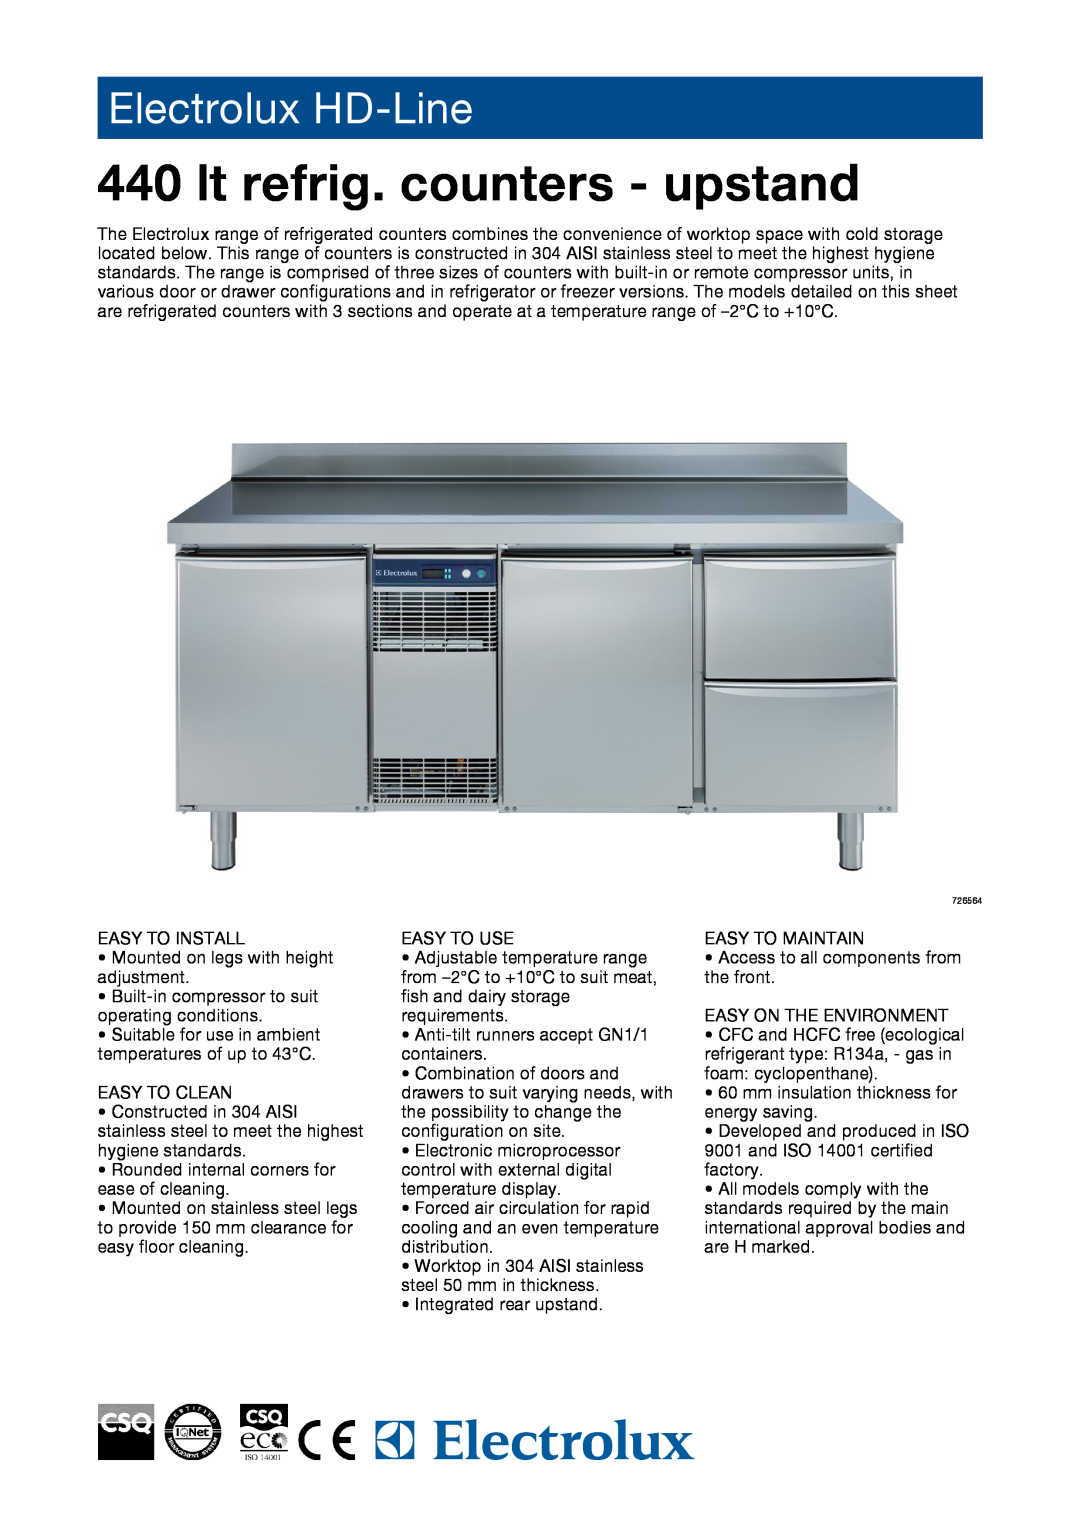 Electrolux 726566, 727087, 726563, 726564, 727081, 726565, 727079 manual lt refrig. counters - upstand, Electrolux HD-Line 